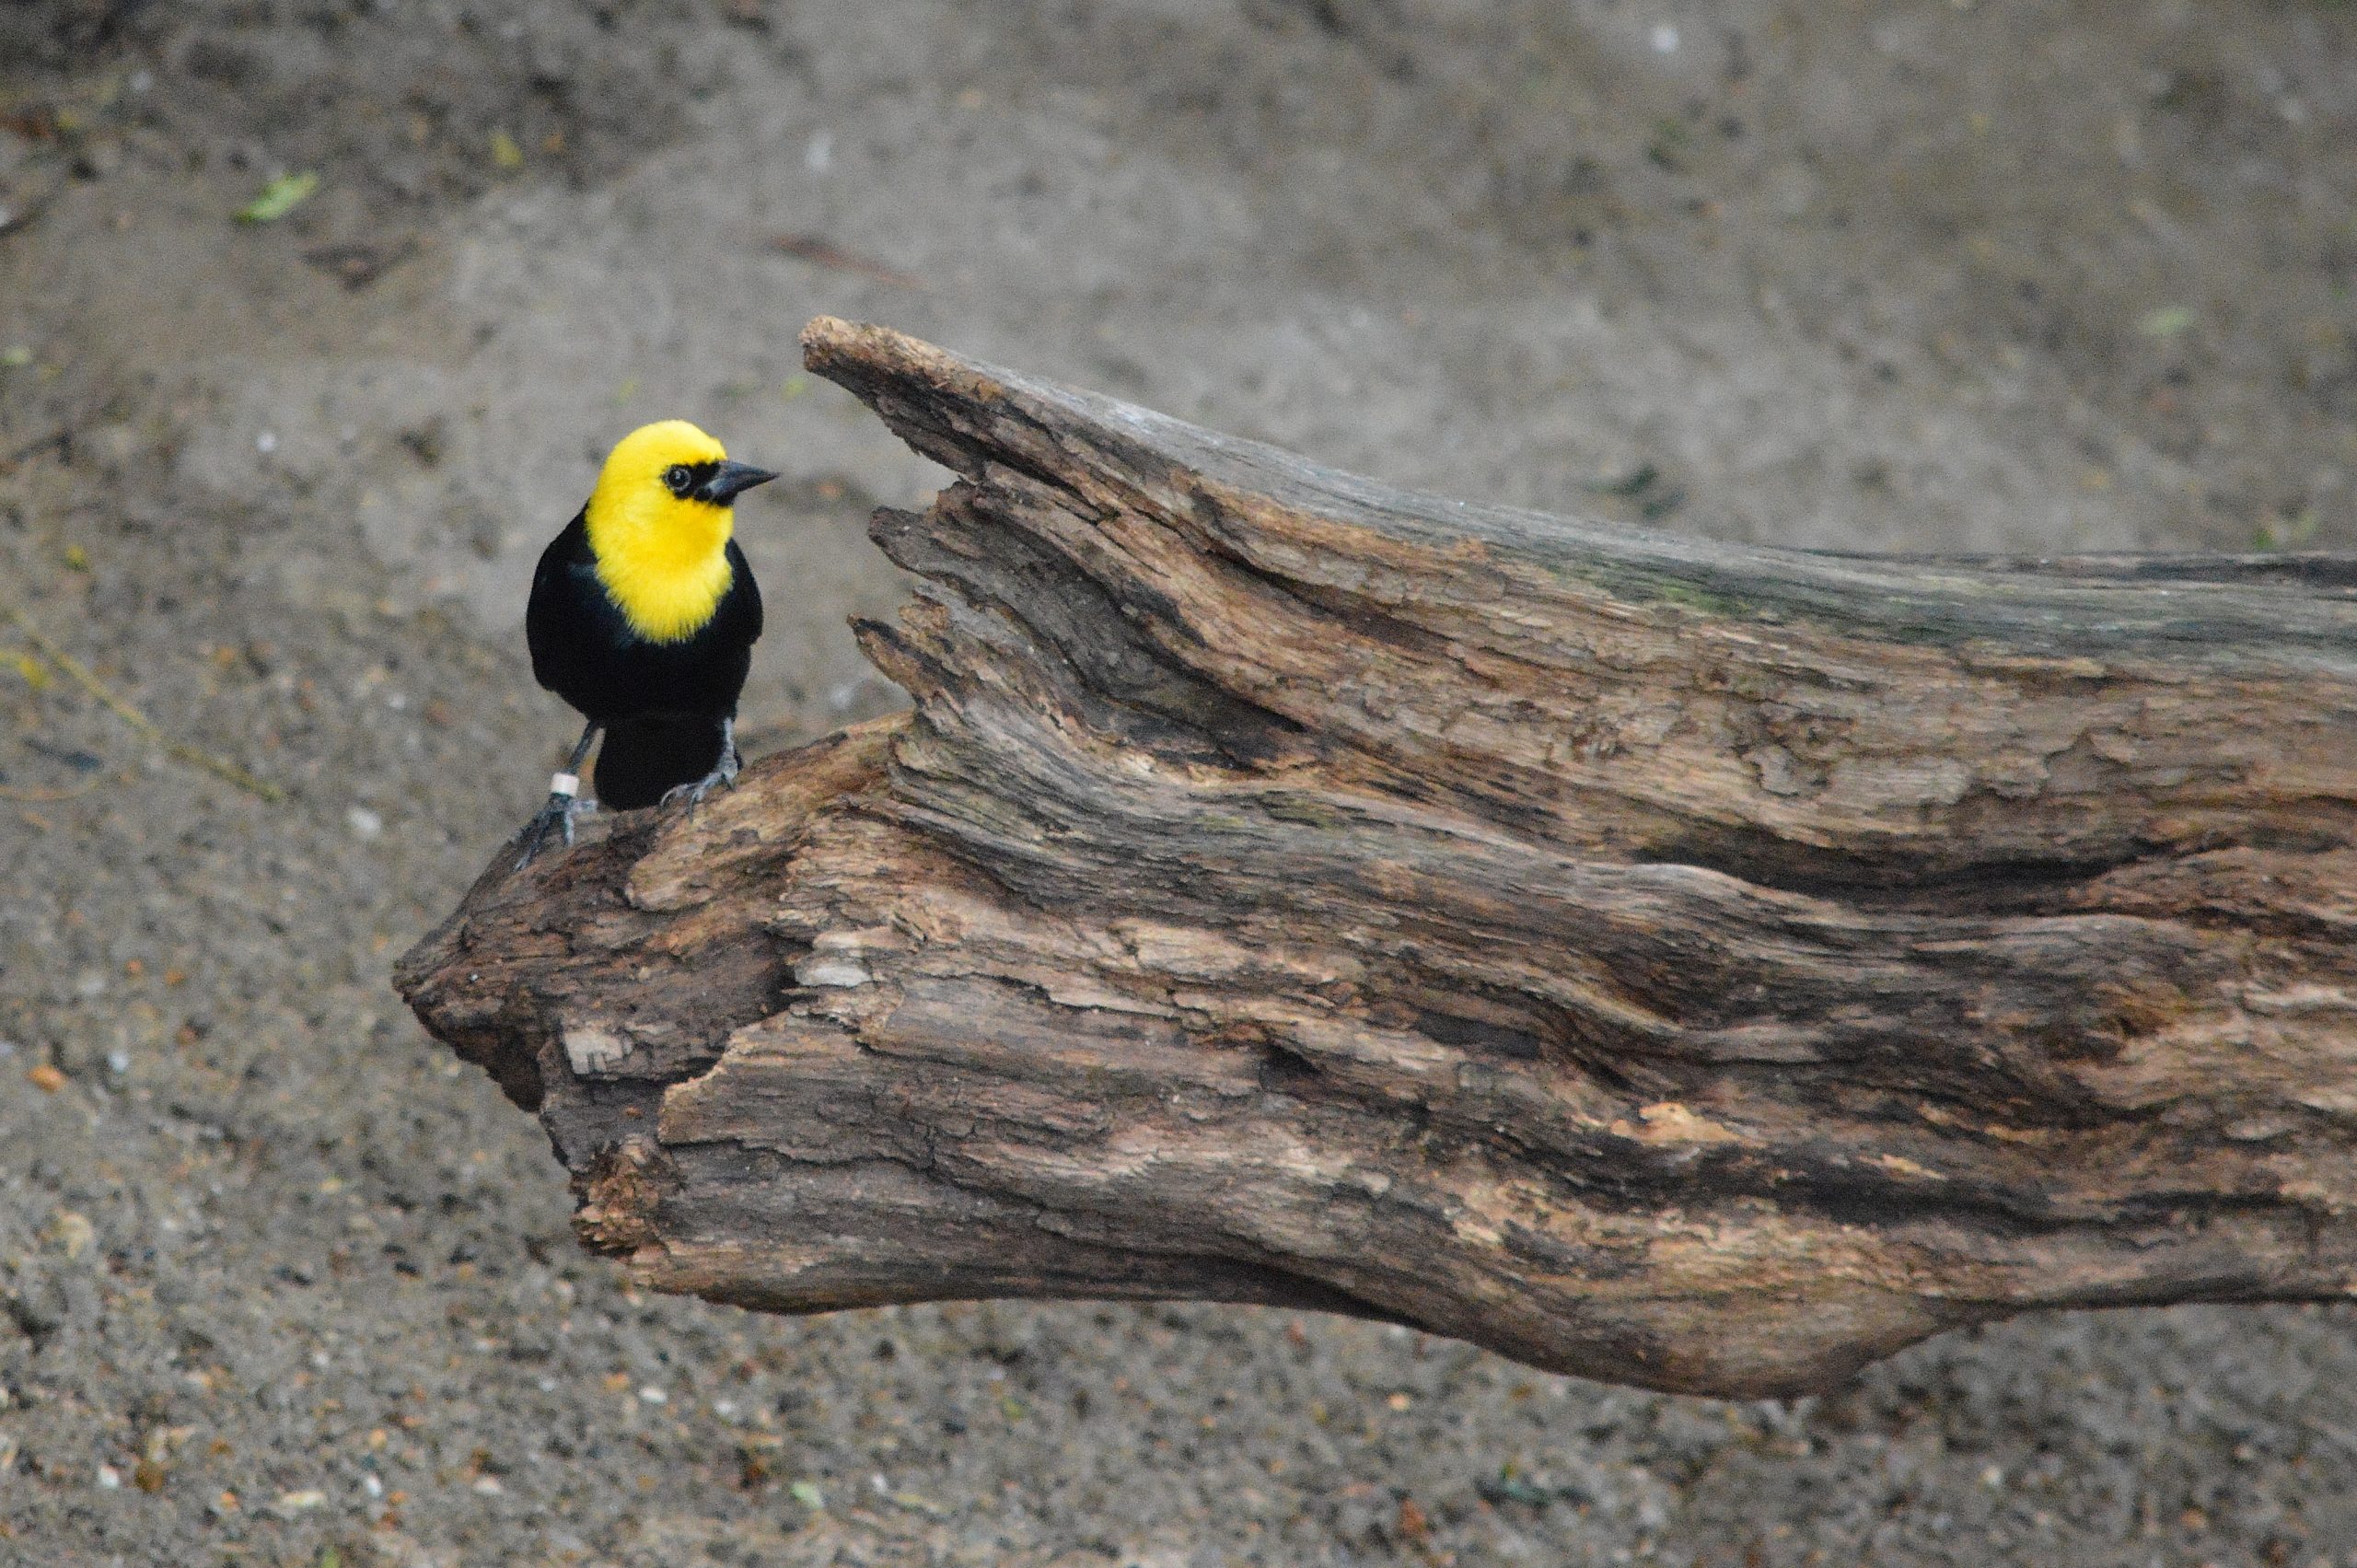 Yellow-hooded Blackbird perched on a log